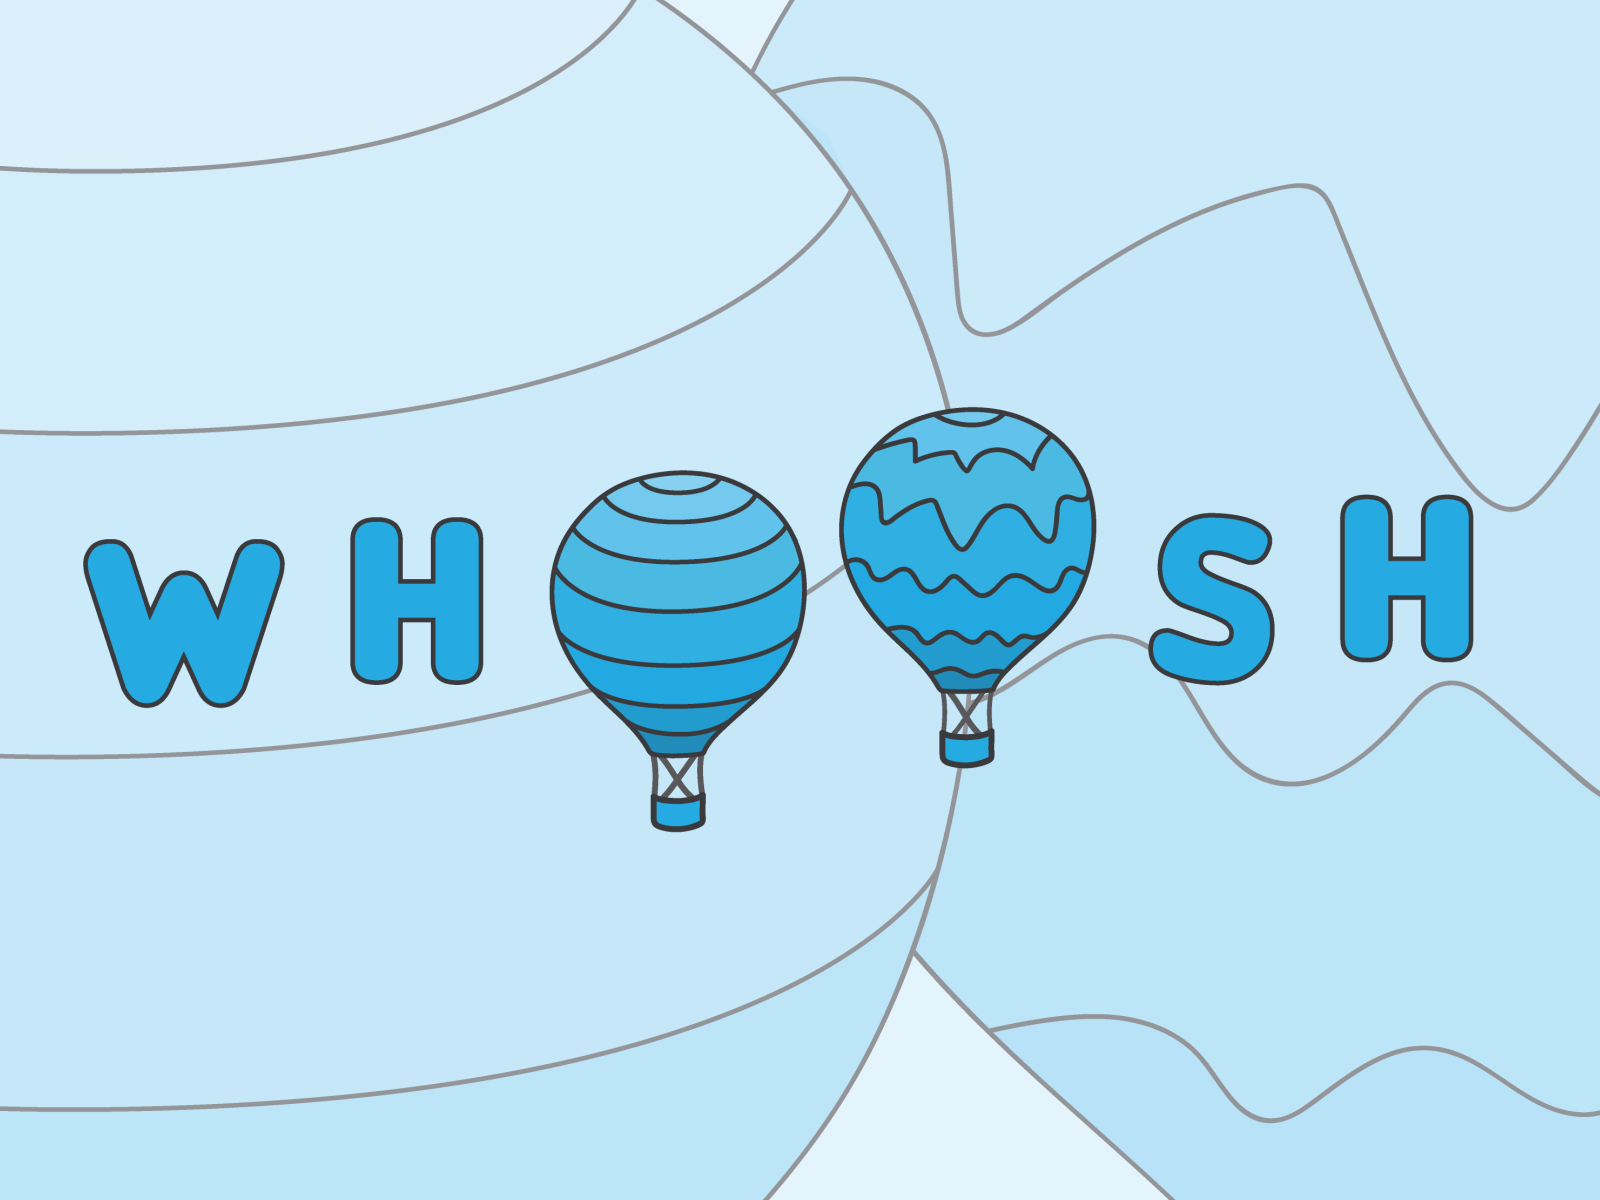 Whoosh! by Michelle Sacks on Dribbble